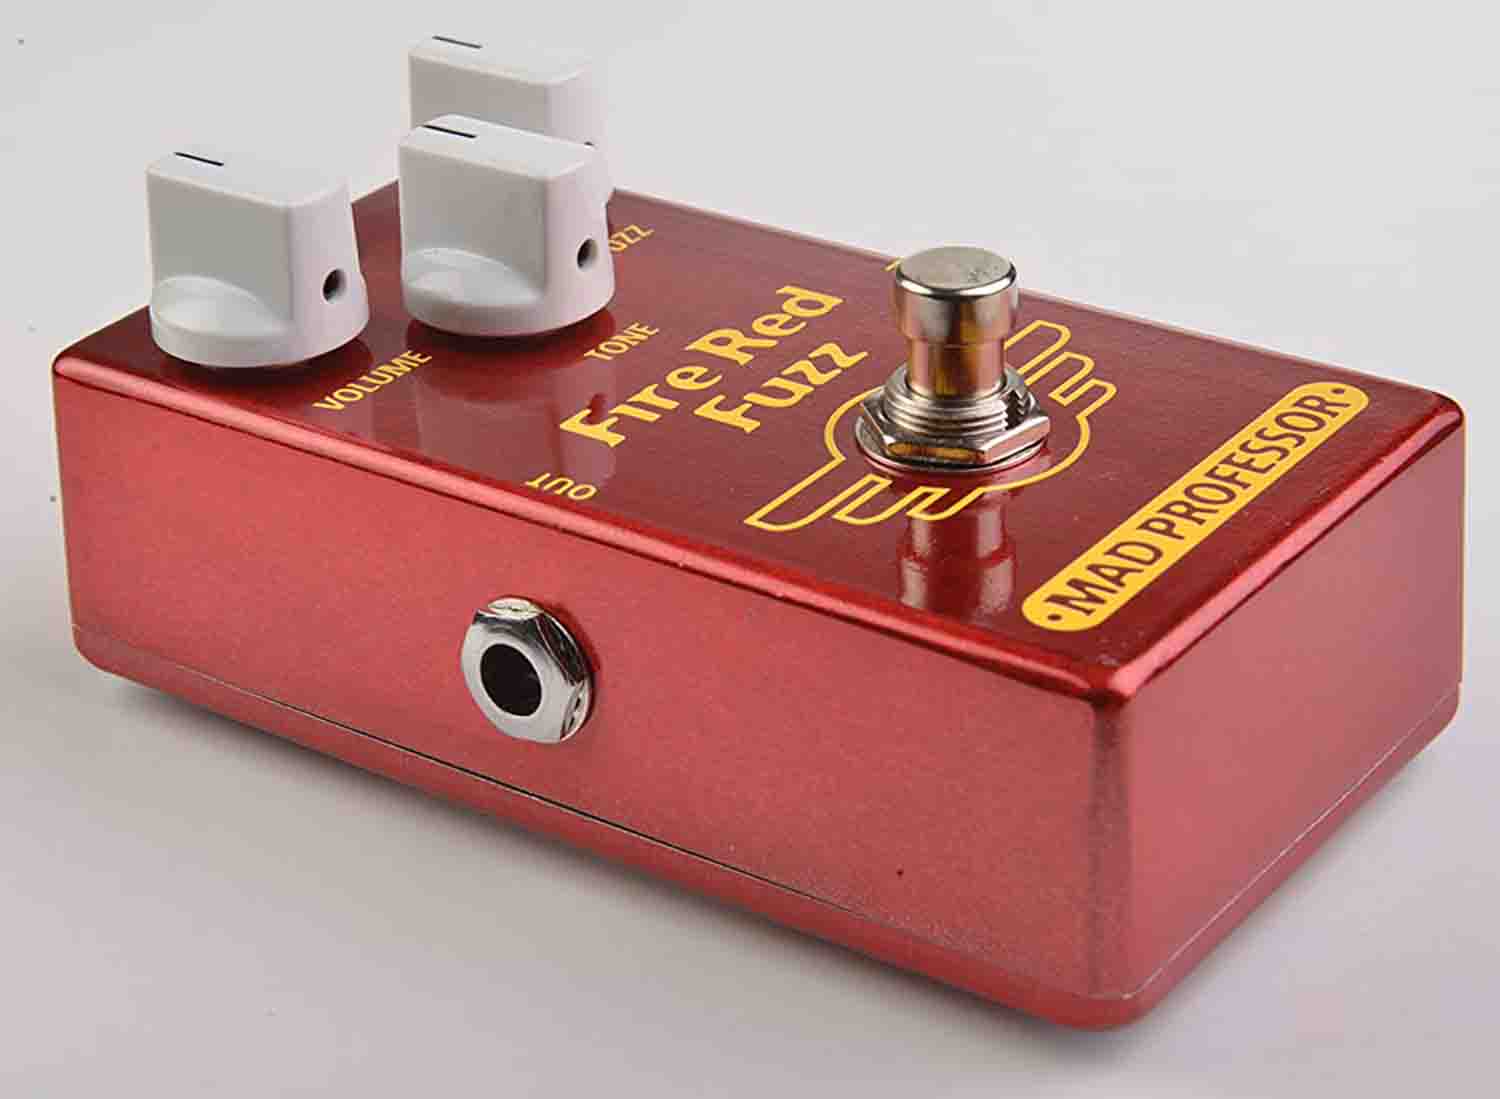 Mad Professor MAD-FRF Guitar Distortion Effects Pedal - Hollywood DJ